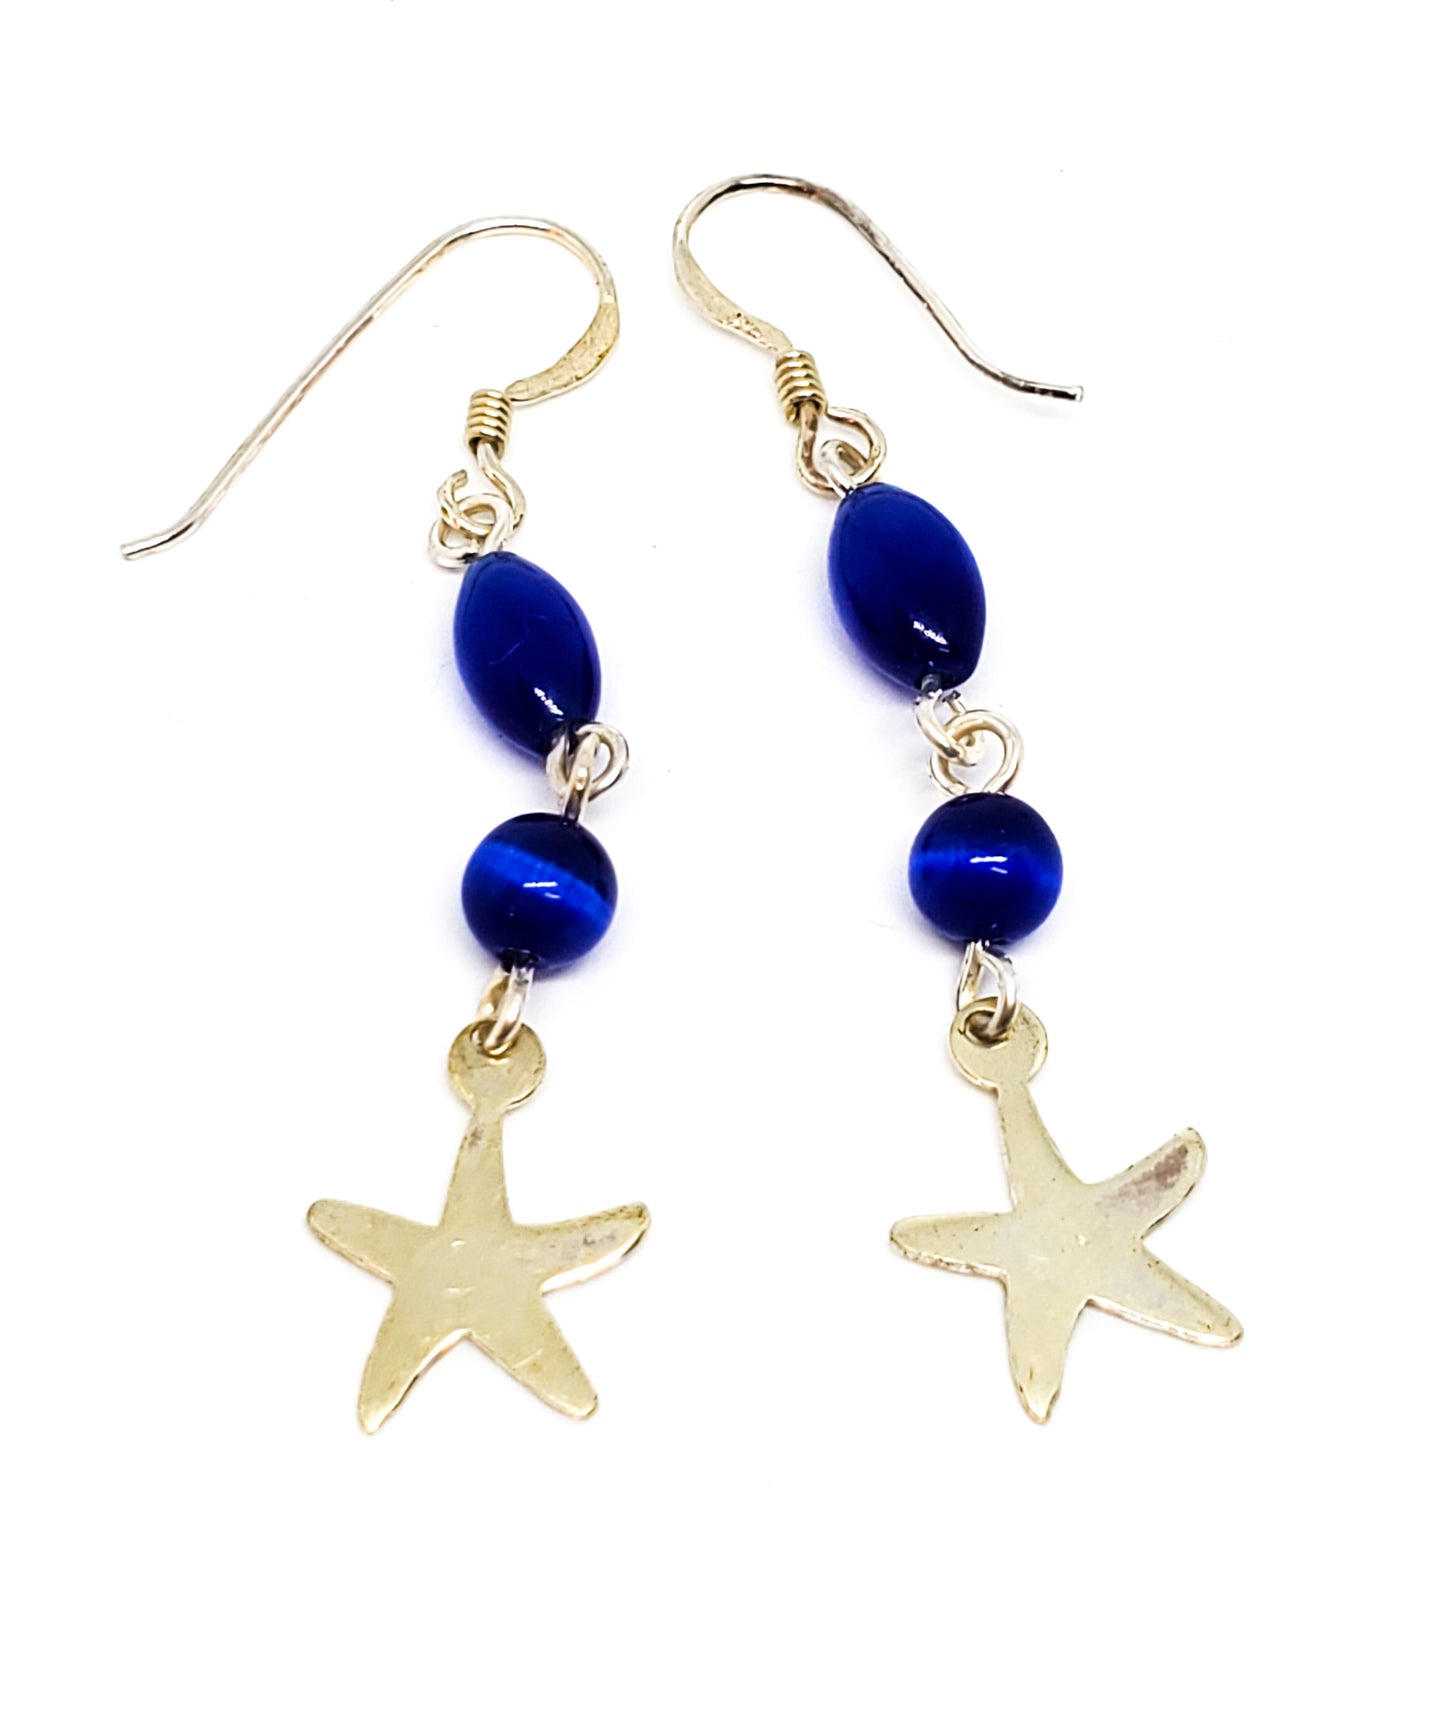 Blue cat's eye glass sterling silver star drop vintage earrings 2 inches 925